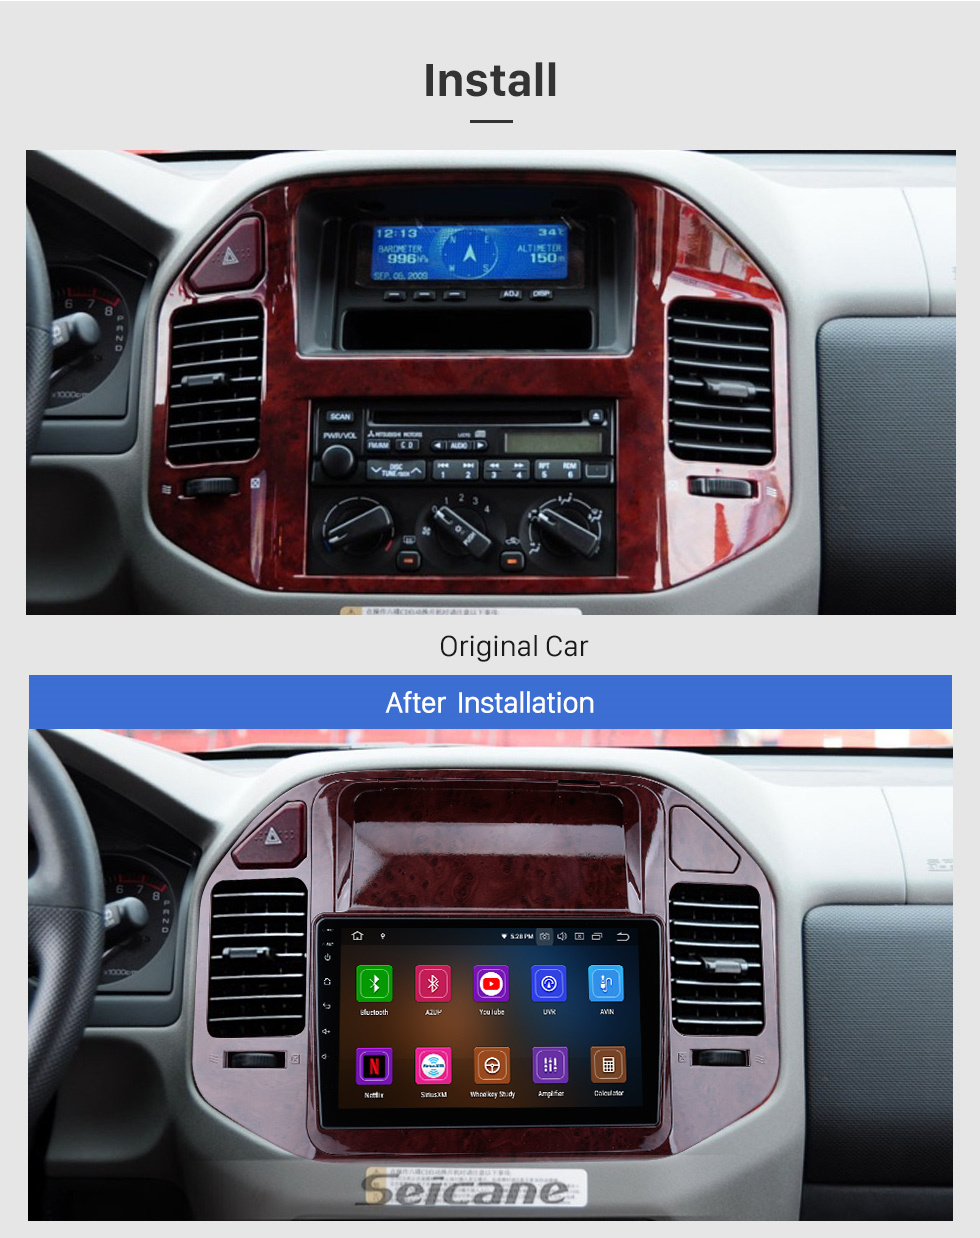 Seicane Android 11.0 for 2004-2011 Mitsubishi V73 Pajero Radio with Bluetooth 9 inch HD Touchscreen GPS Navigation System Carplay support DSP